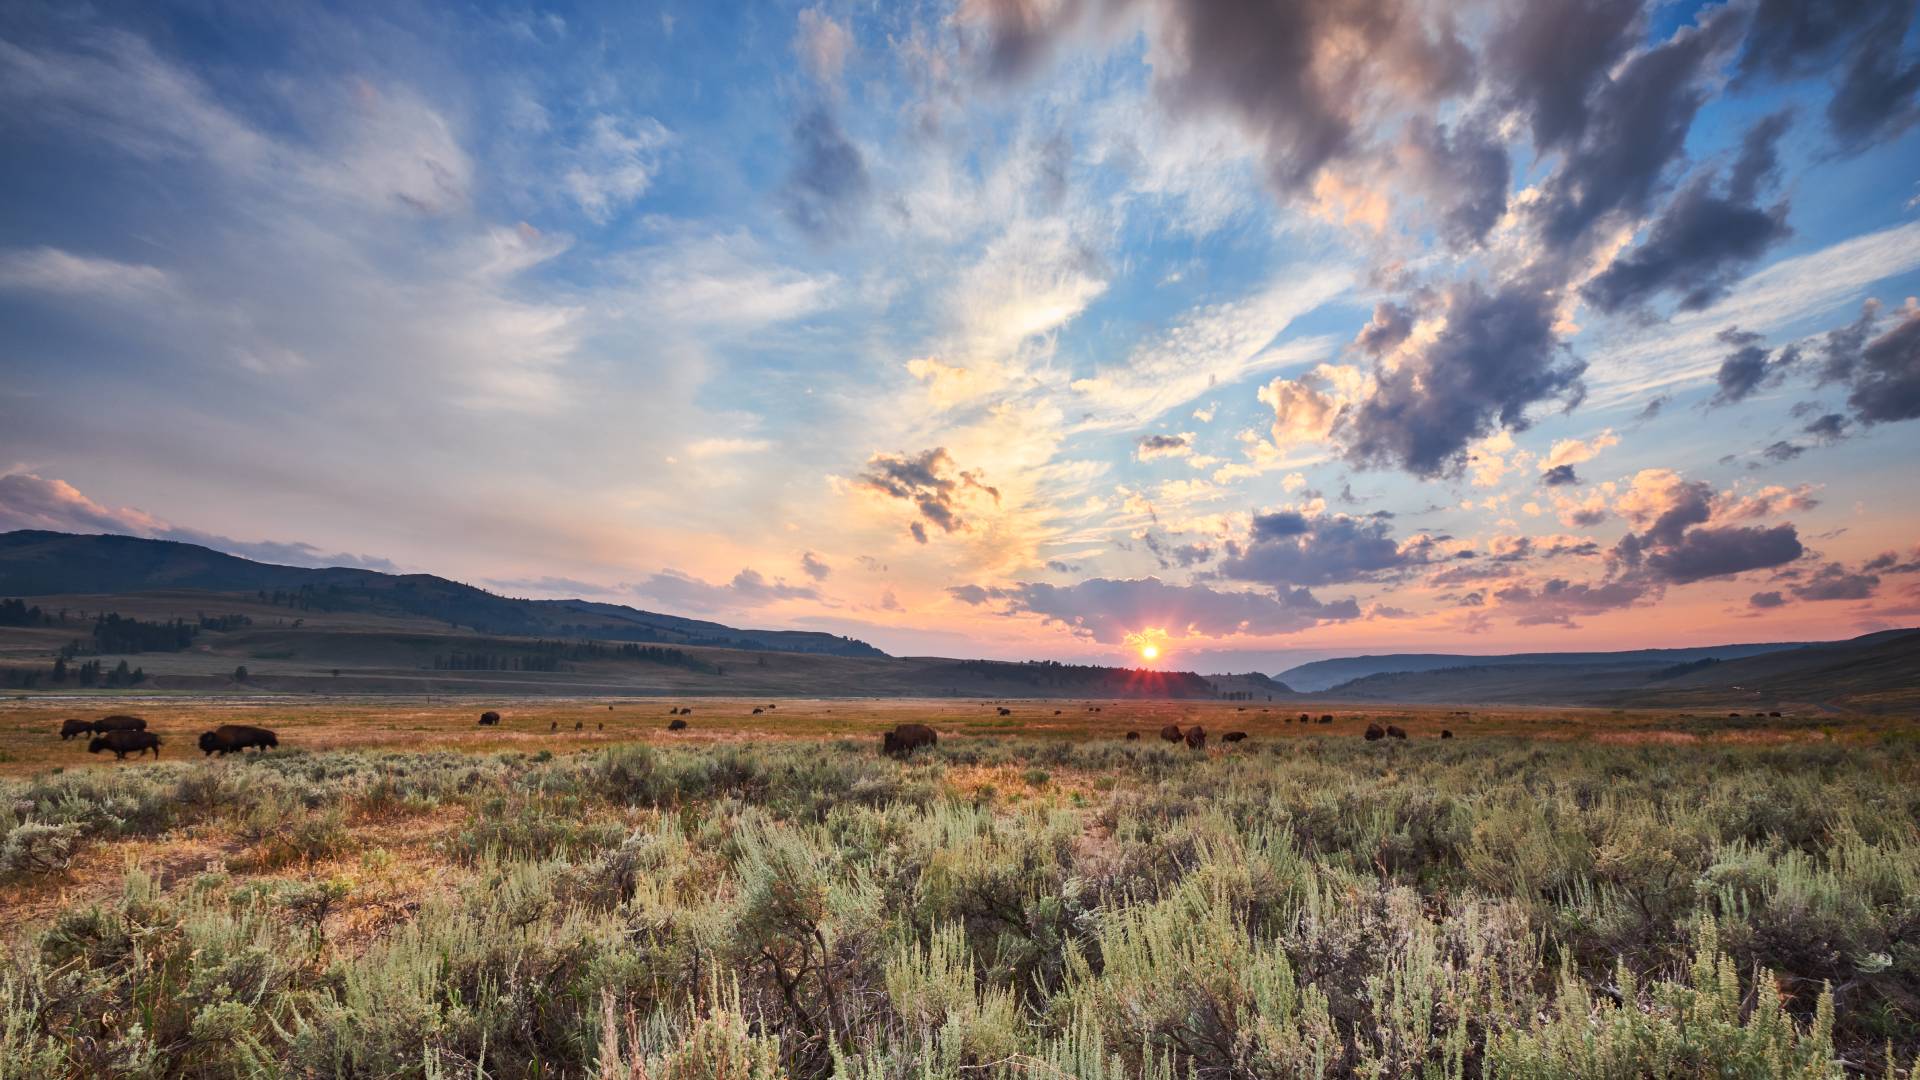 The landscape of Lamar Valley in Wyoming at sunset with bison grazing the plains and bluffs in the background.